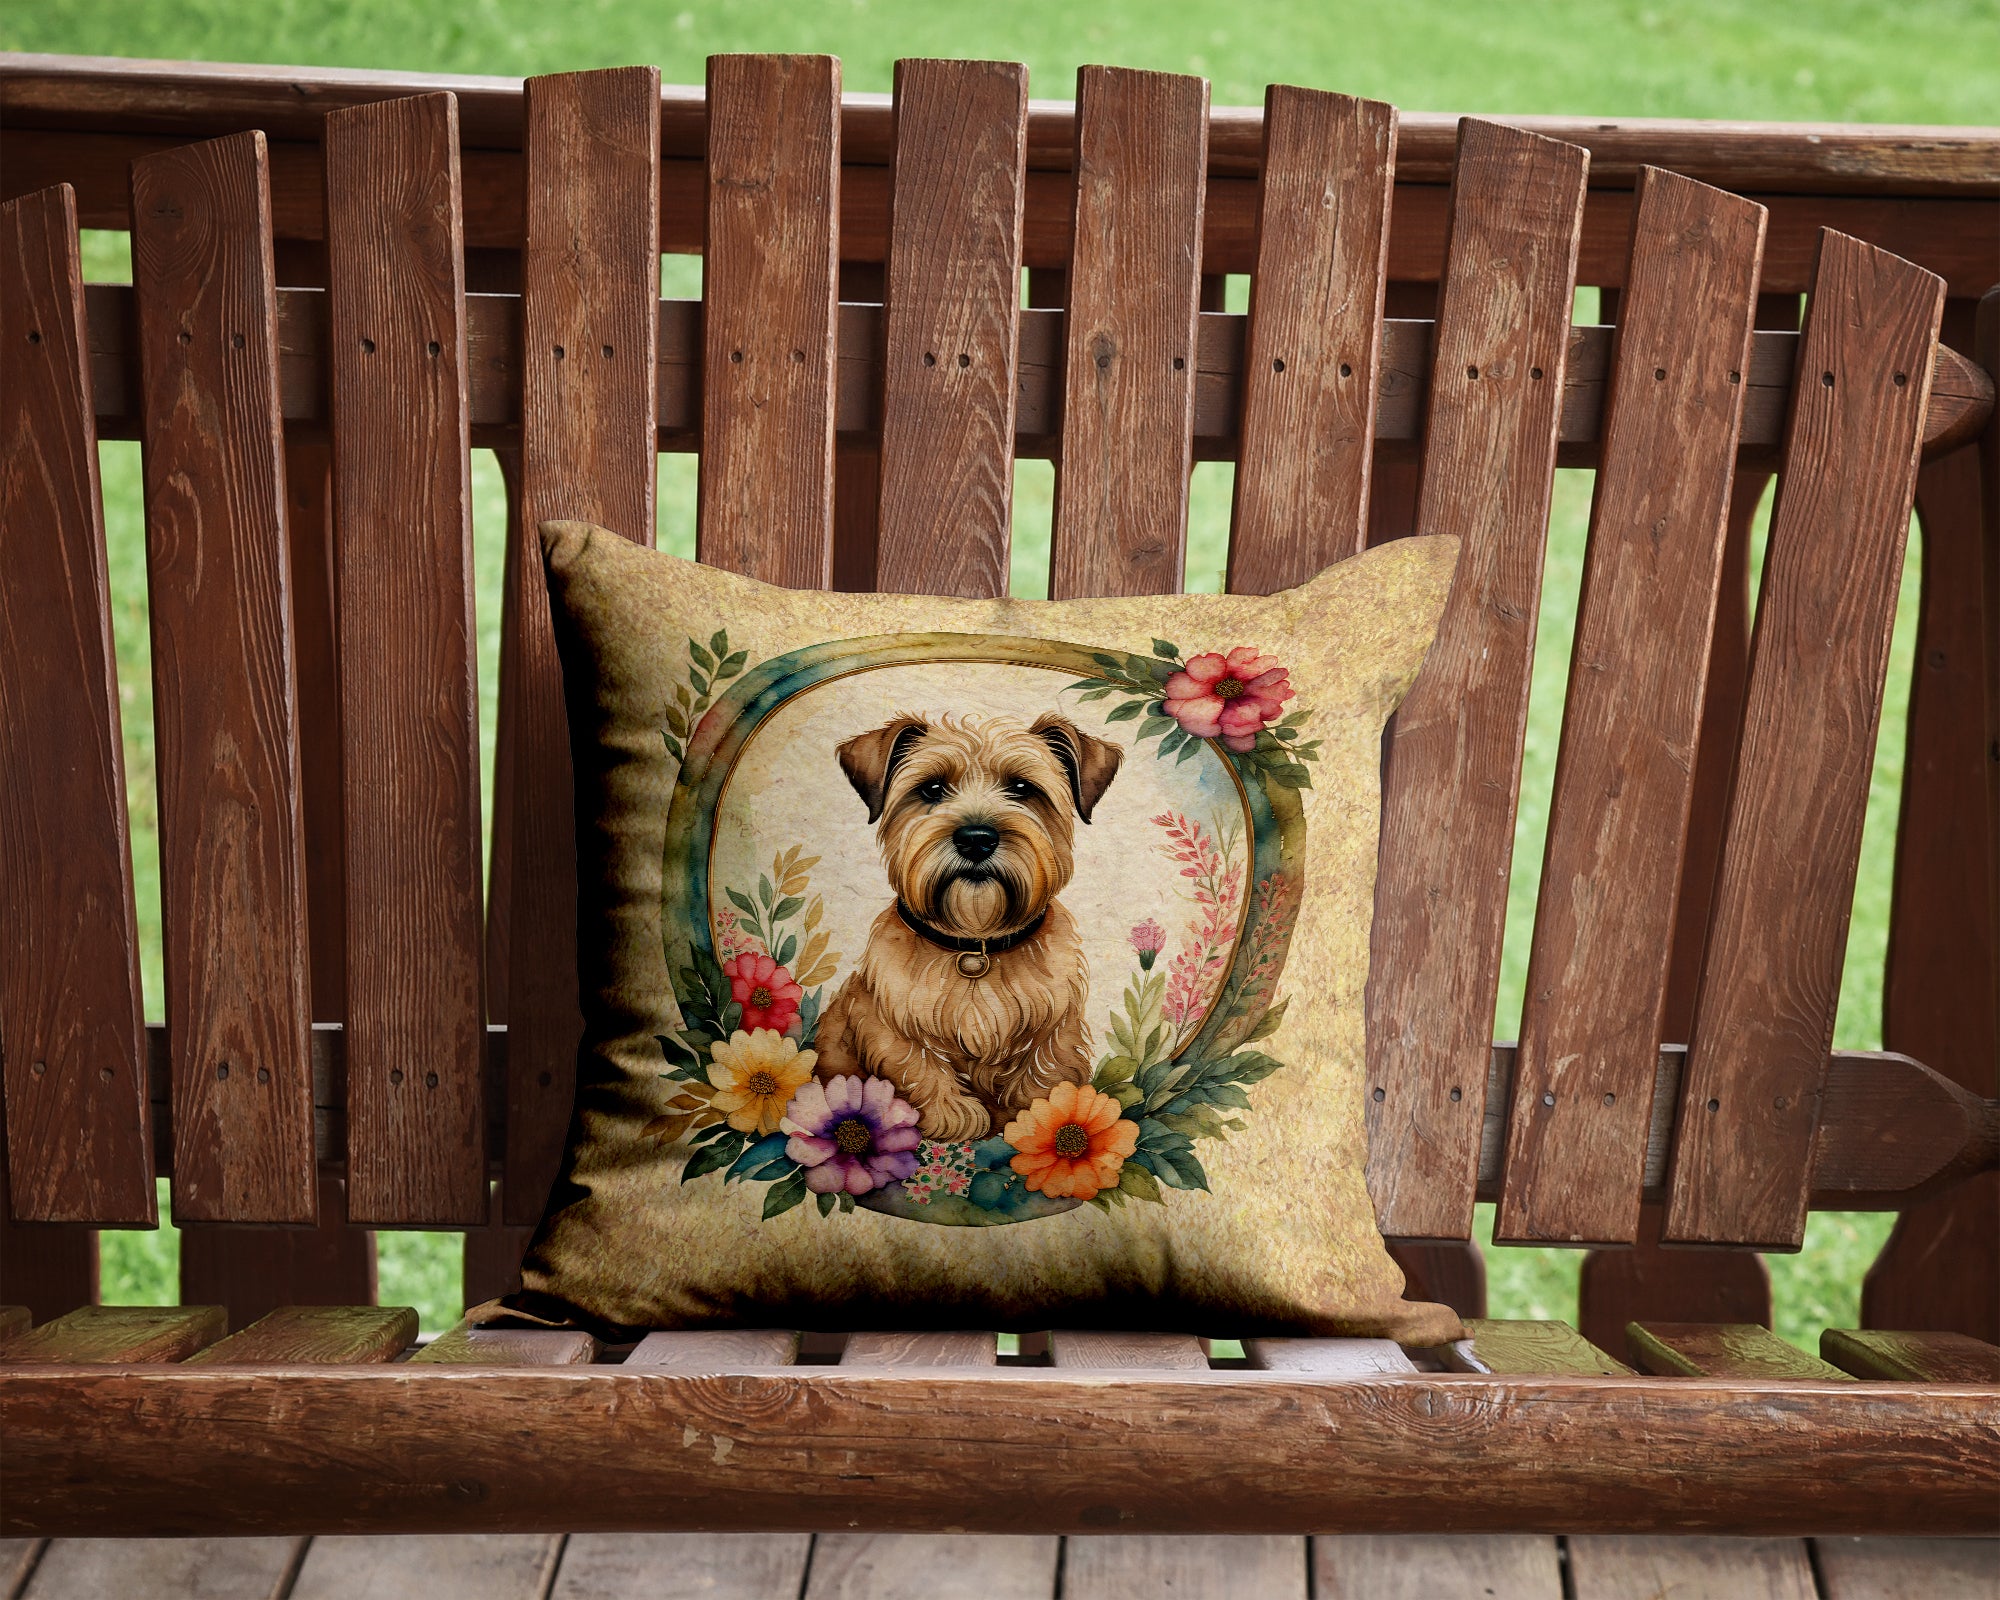 Buy this Wheaten Terrier and Flowers Fabric Decorative Pillow